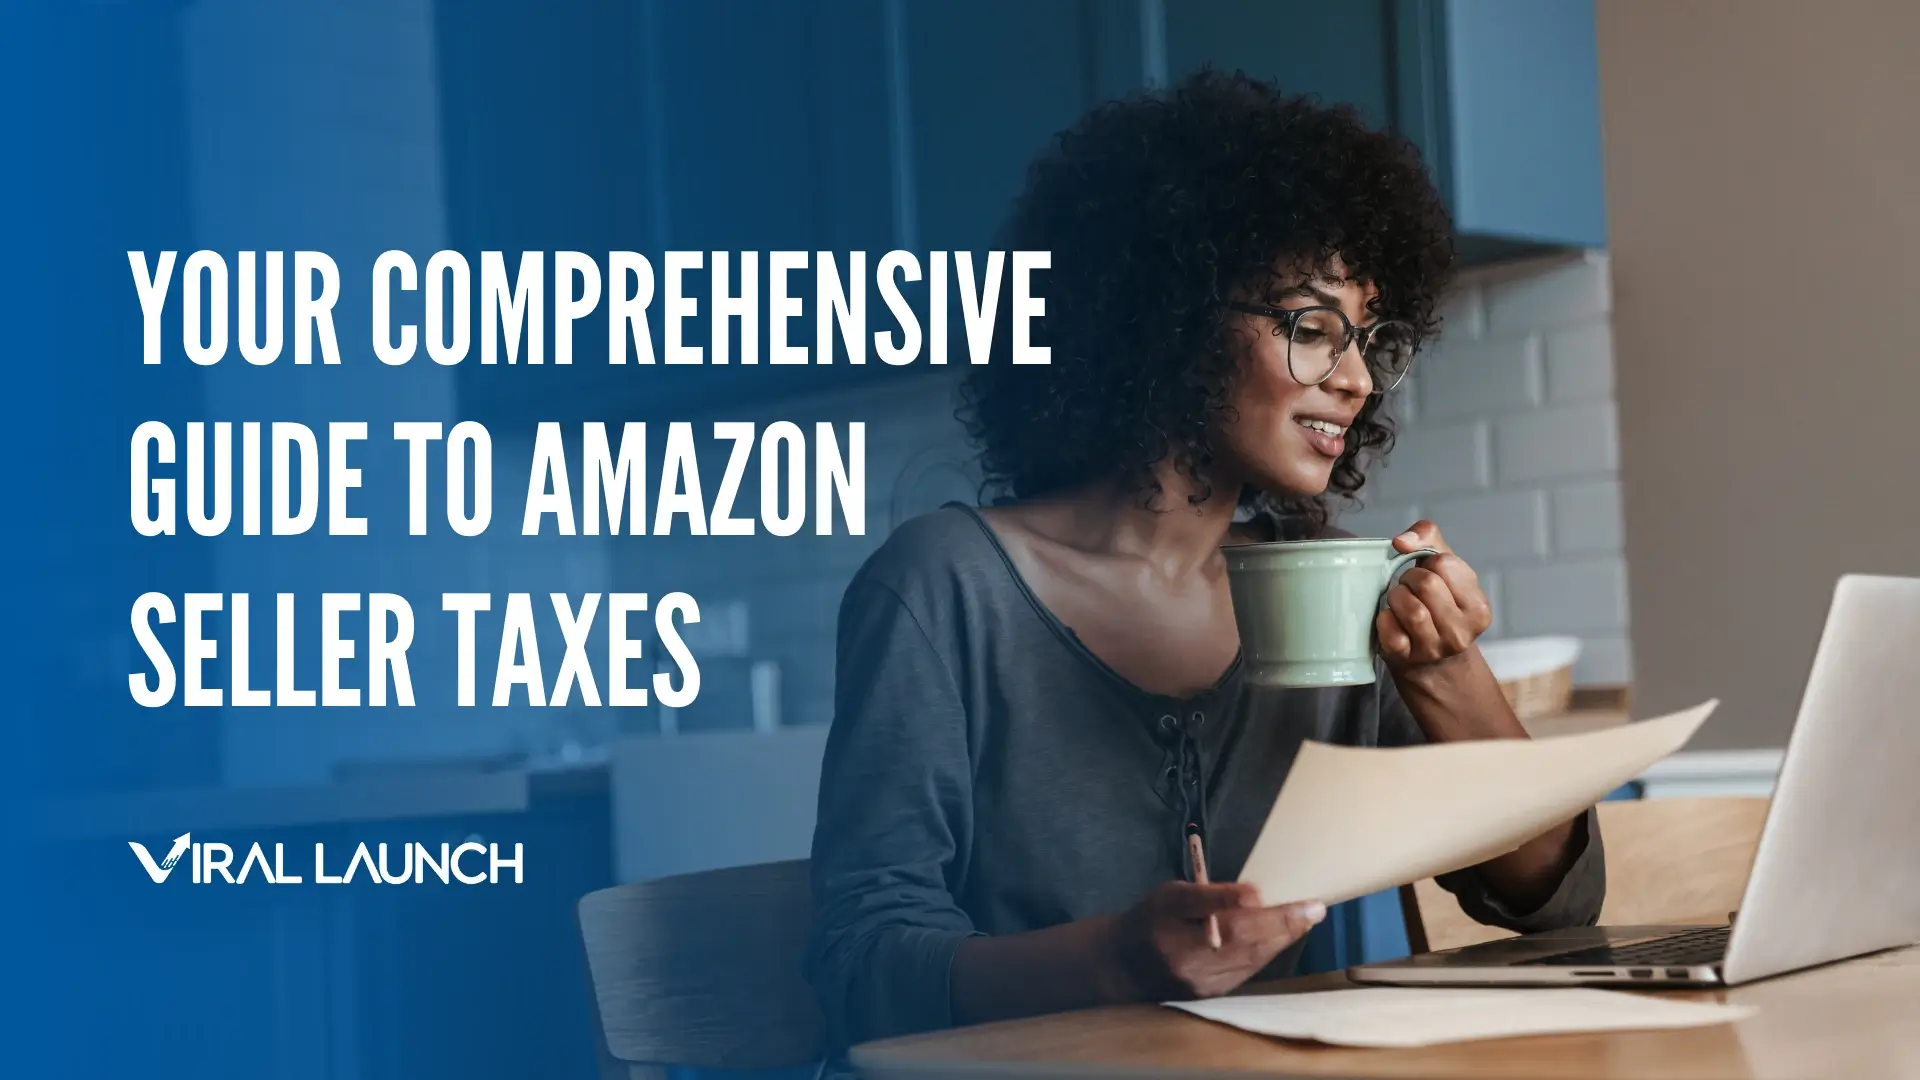 An FBA seller drinking coffee while working on her taxes. The image has the text Your comprehensive guide to amazon seller taxes,